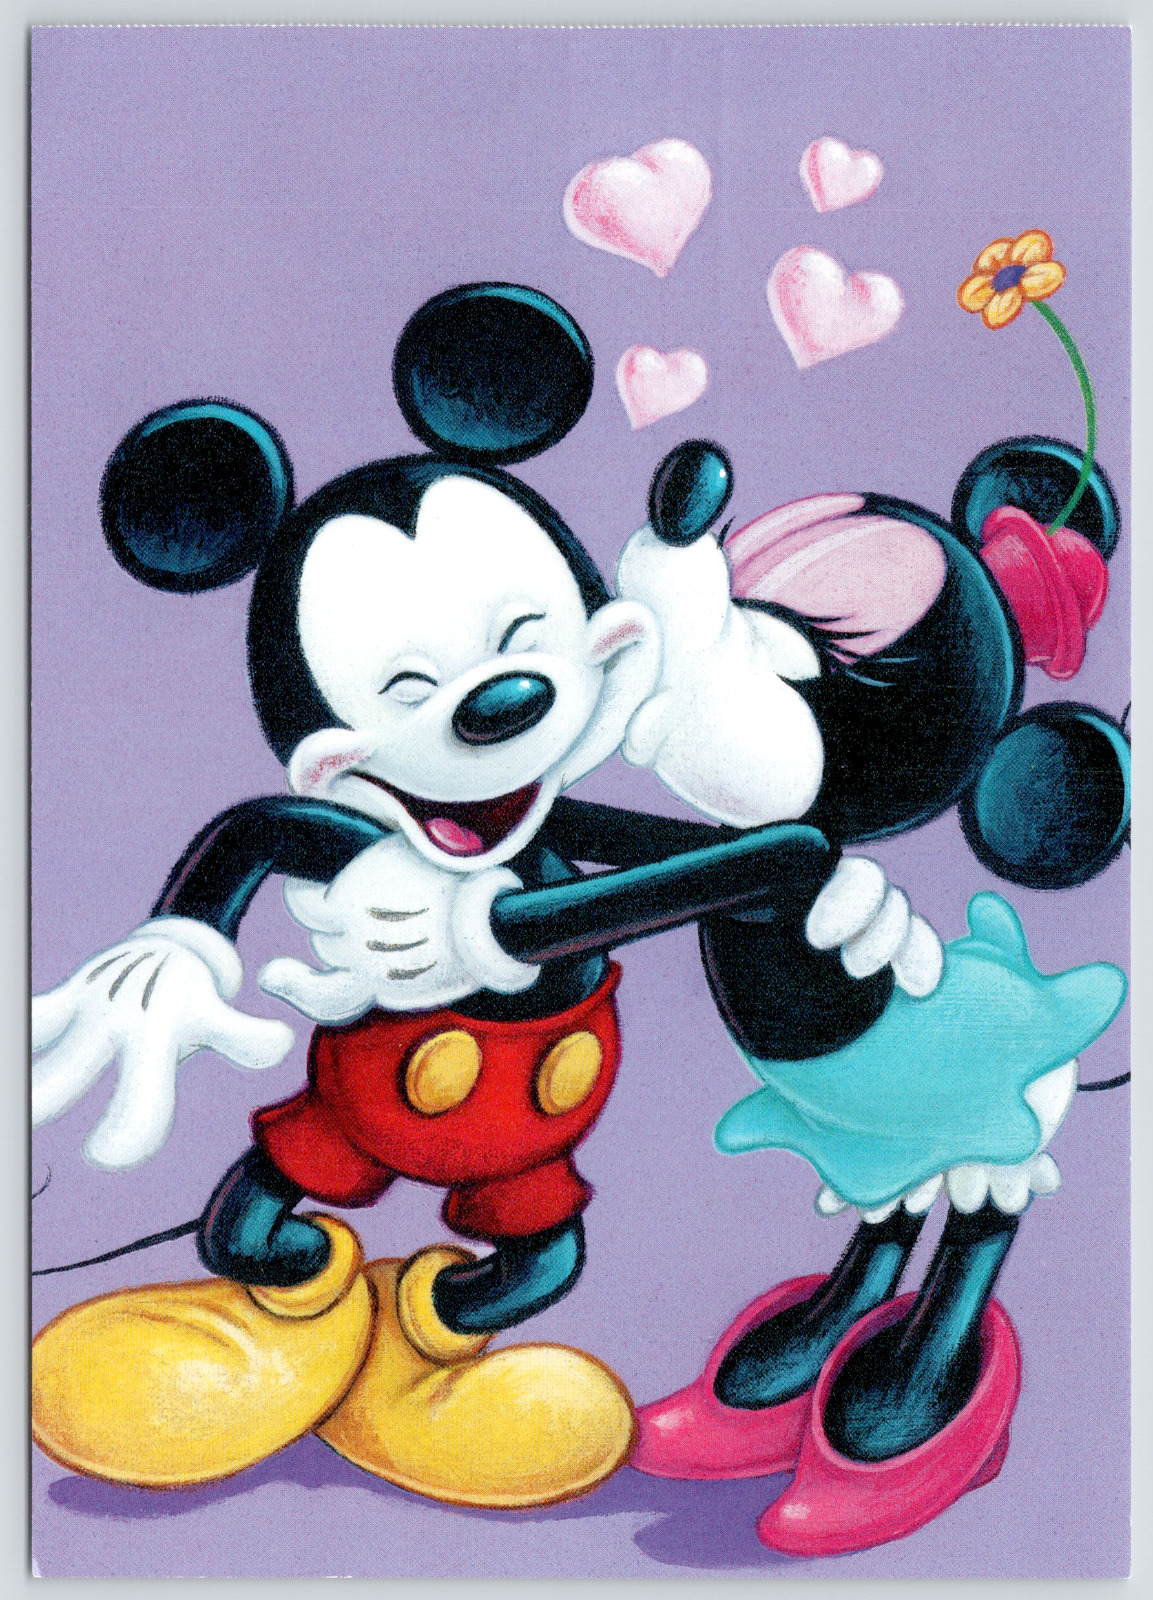 Postcard First Day Issue 04/21/2006 Mickey & Minnie Mouse Disney Mint Condition